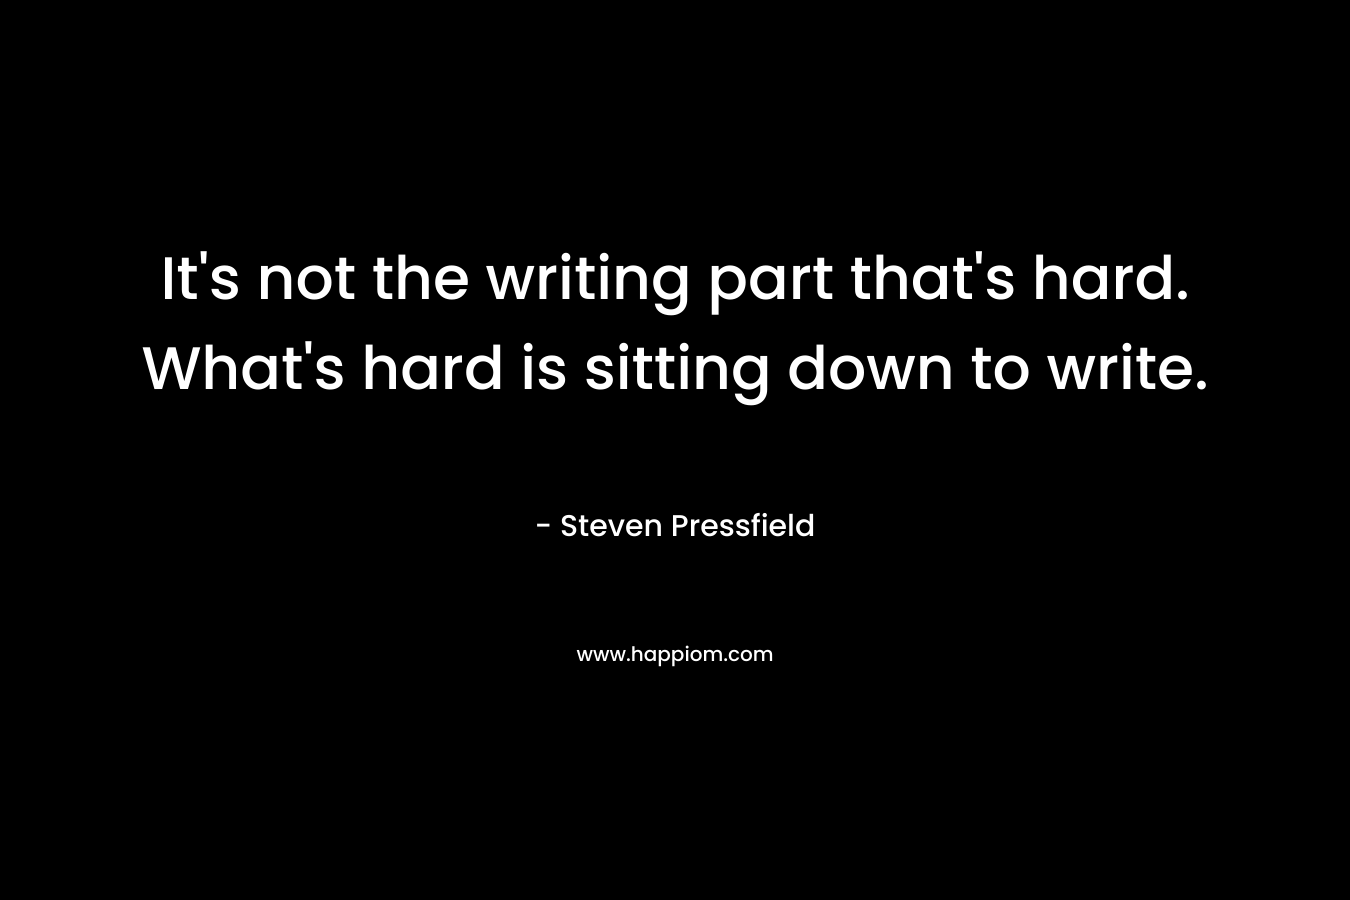 It’s not the writing part that’s hard. What’s hard is sitting down to write. – Steven Pressfield